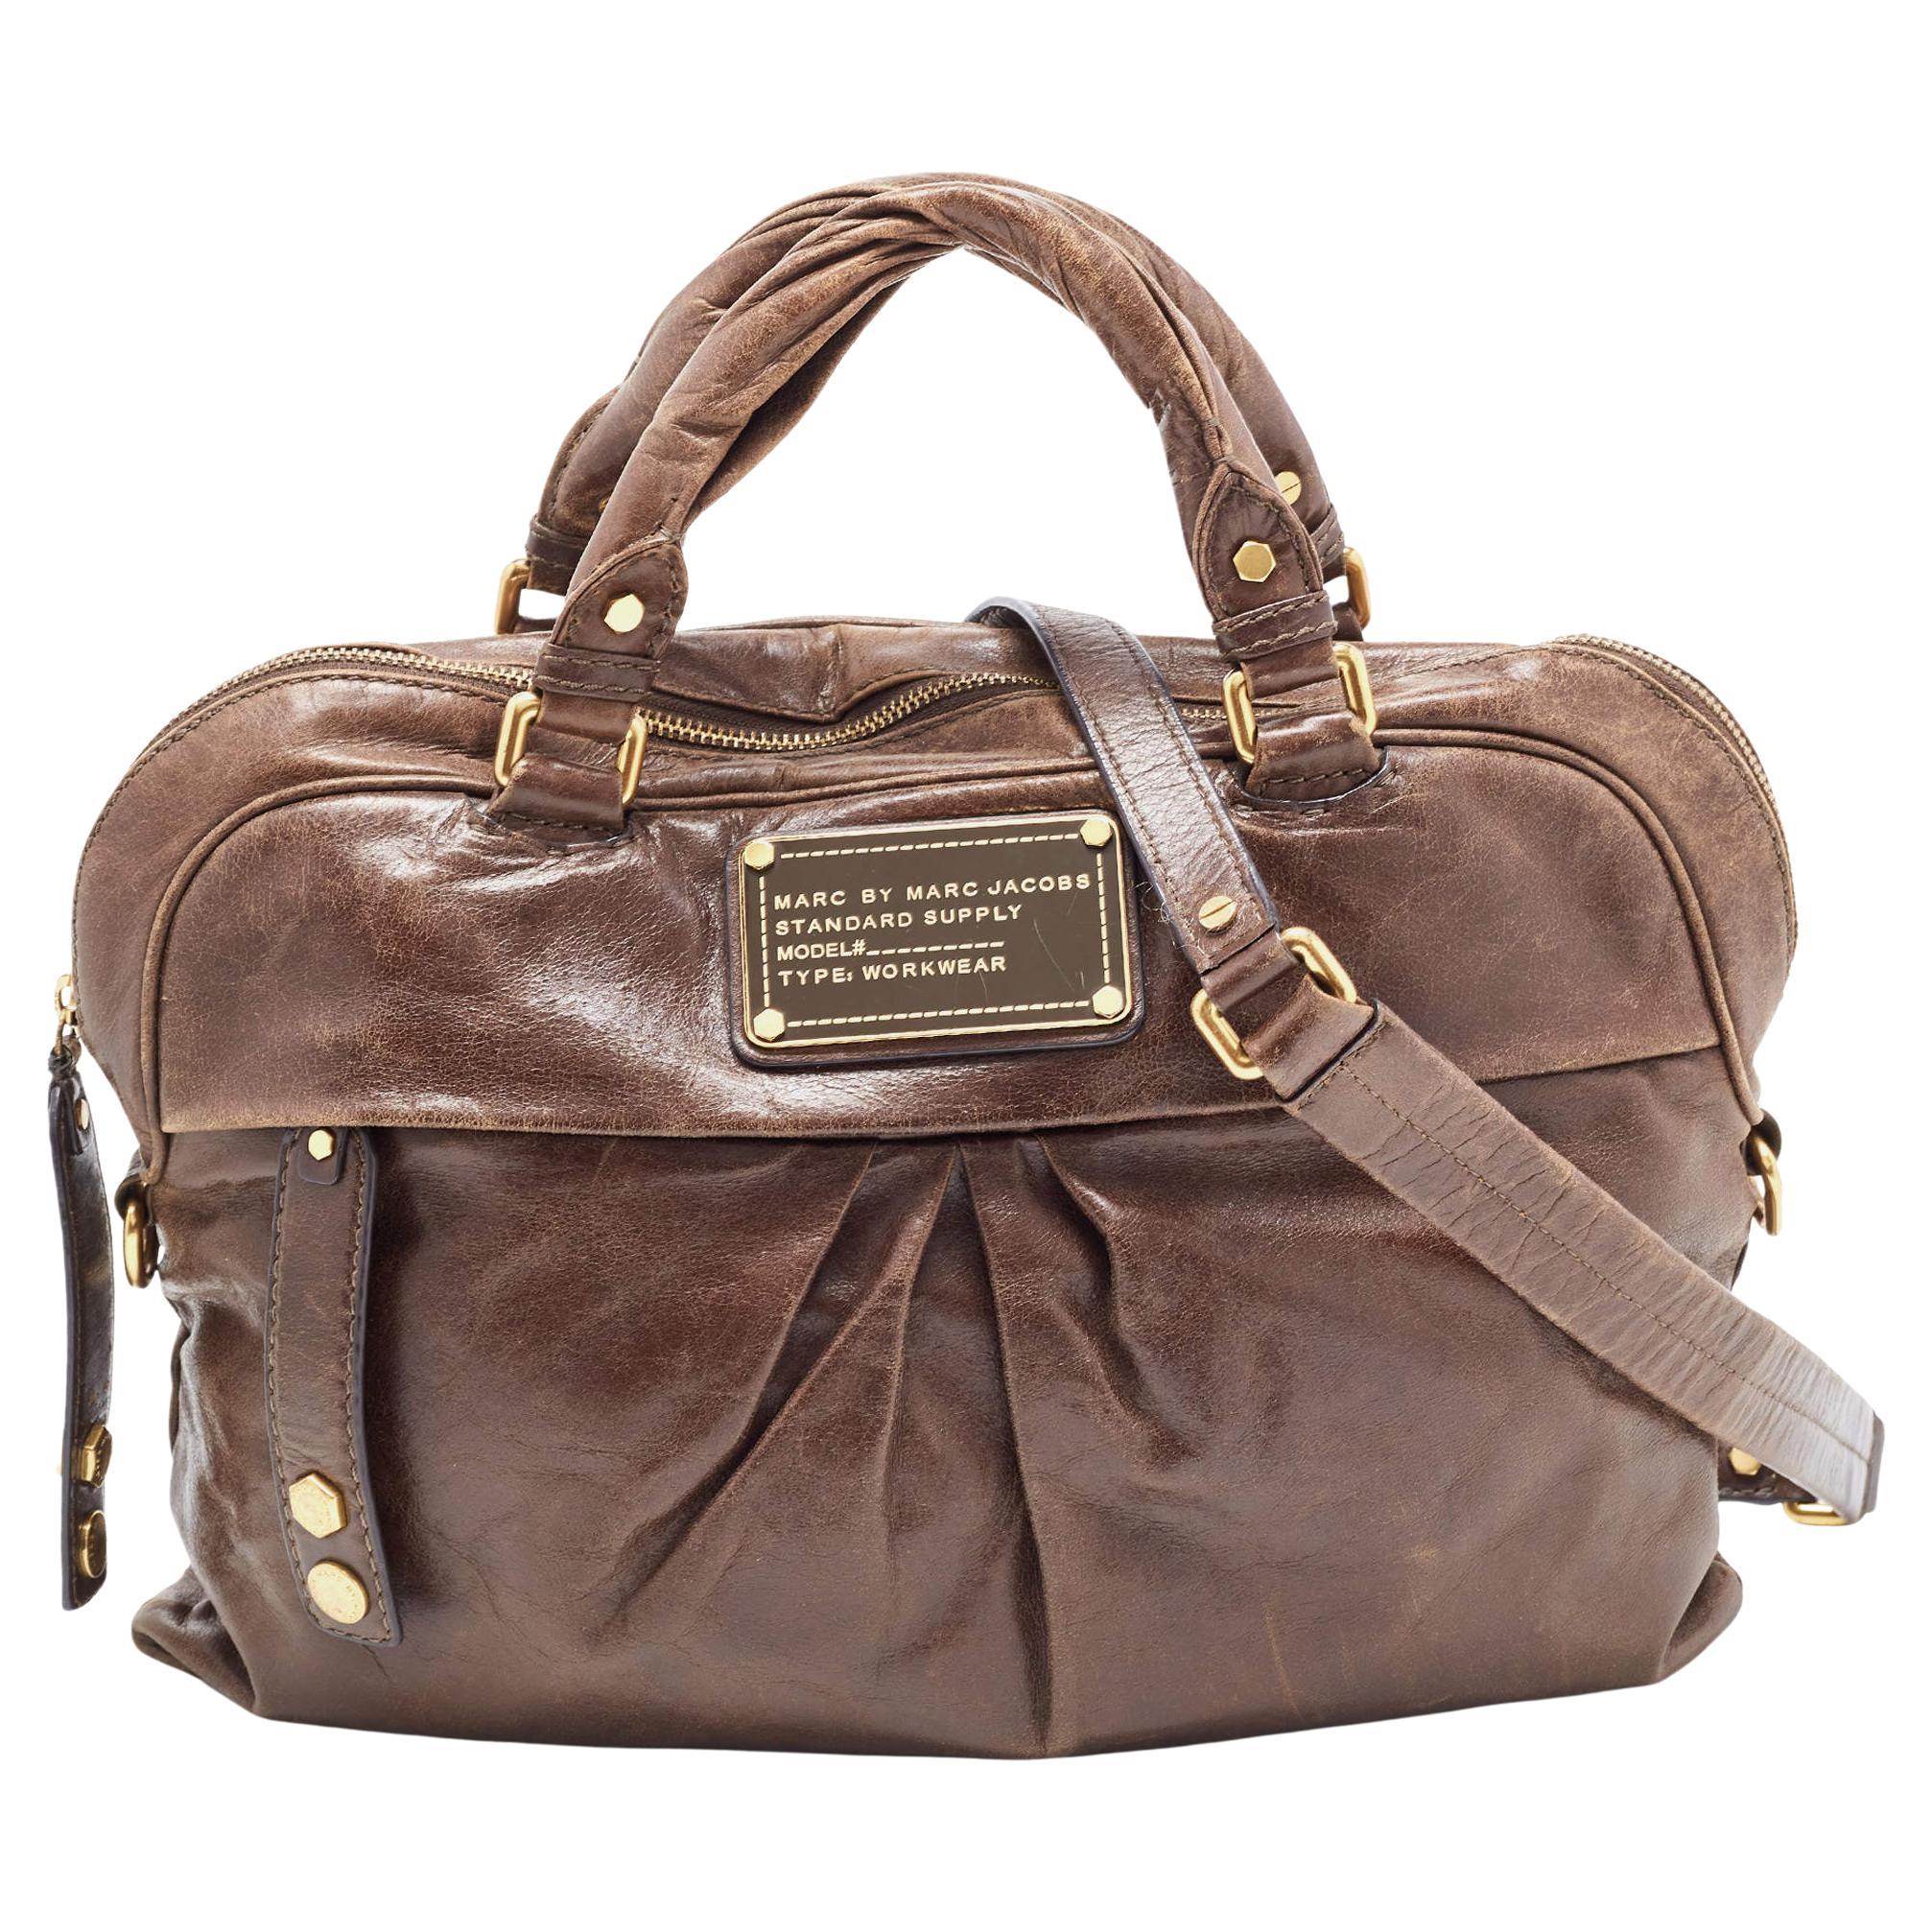 Marc by Marc Jacobs Brown Leather Classic Q Baby Groovee Satchel im Angebot